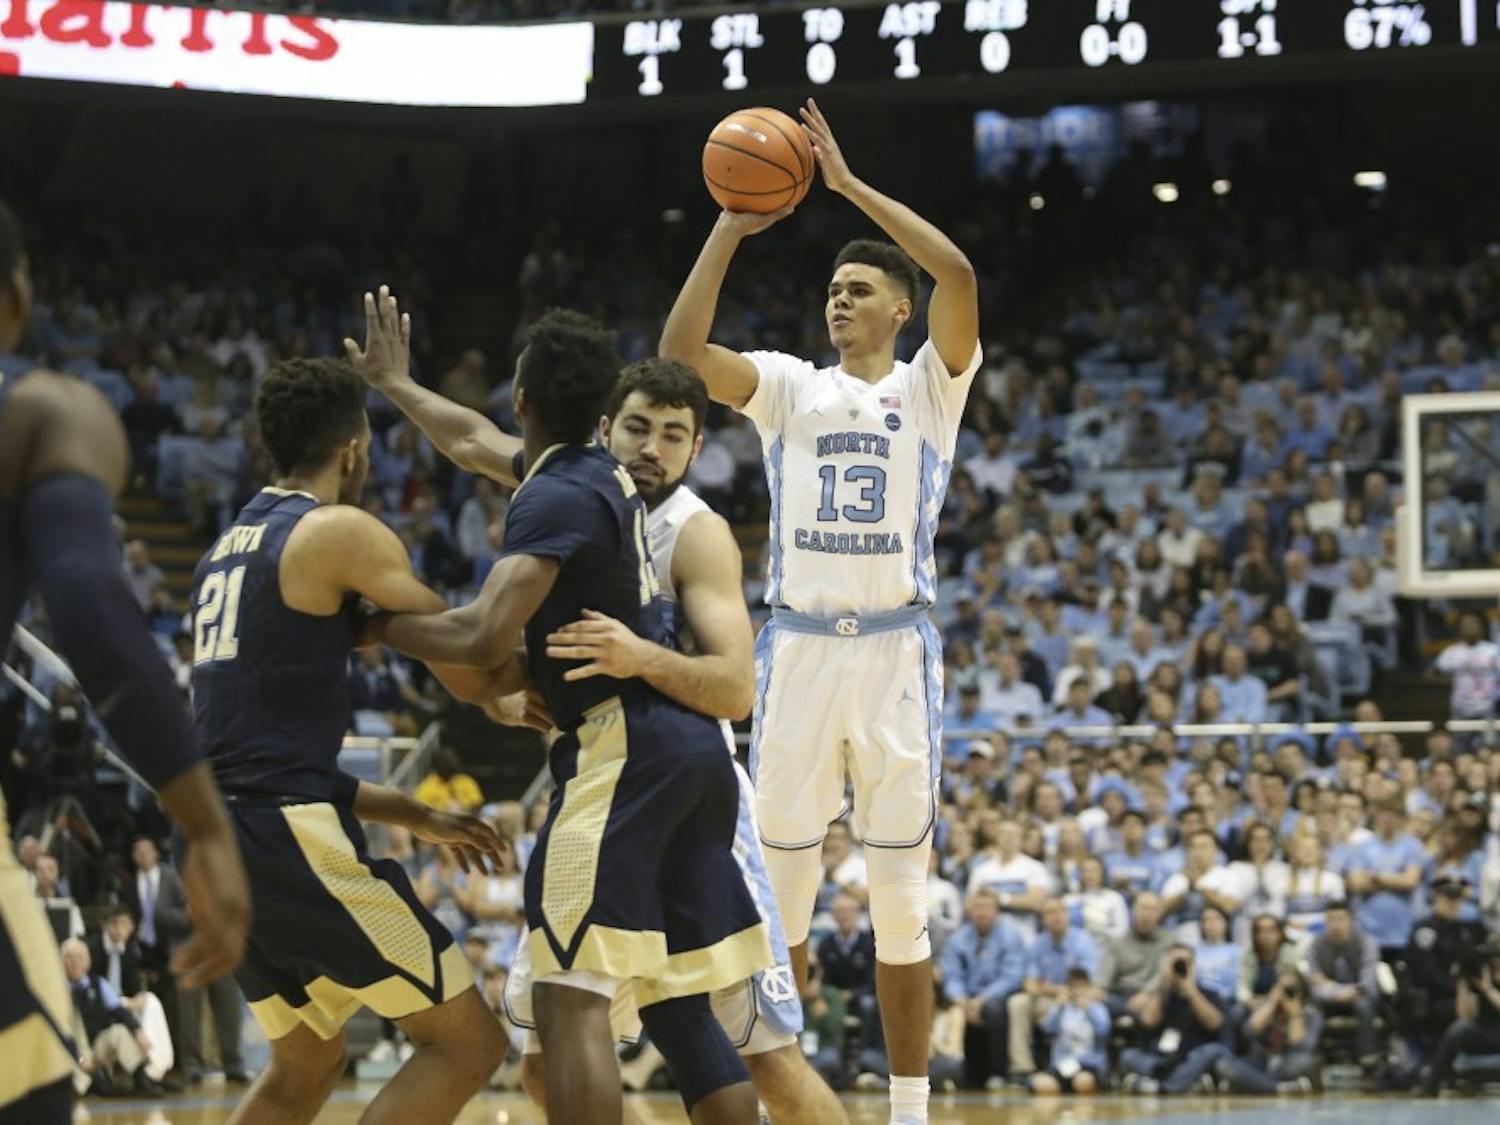 Guard Cameron Johnson (13) shoots a 3-pointer against Pittsburgh on Feb. 3 in the Smith Center.